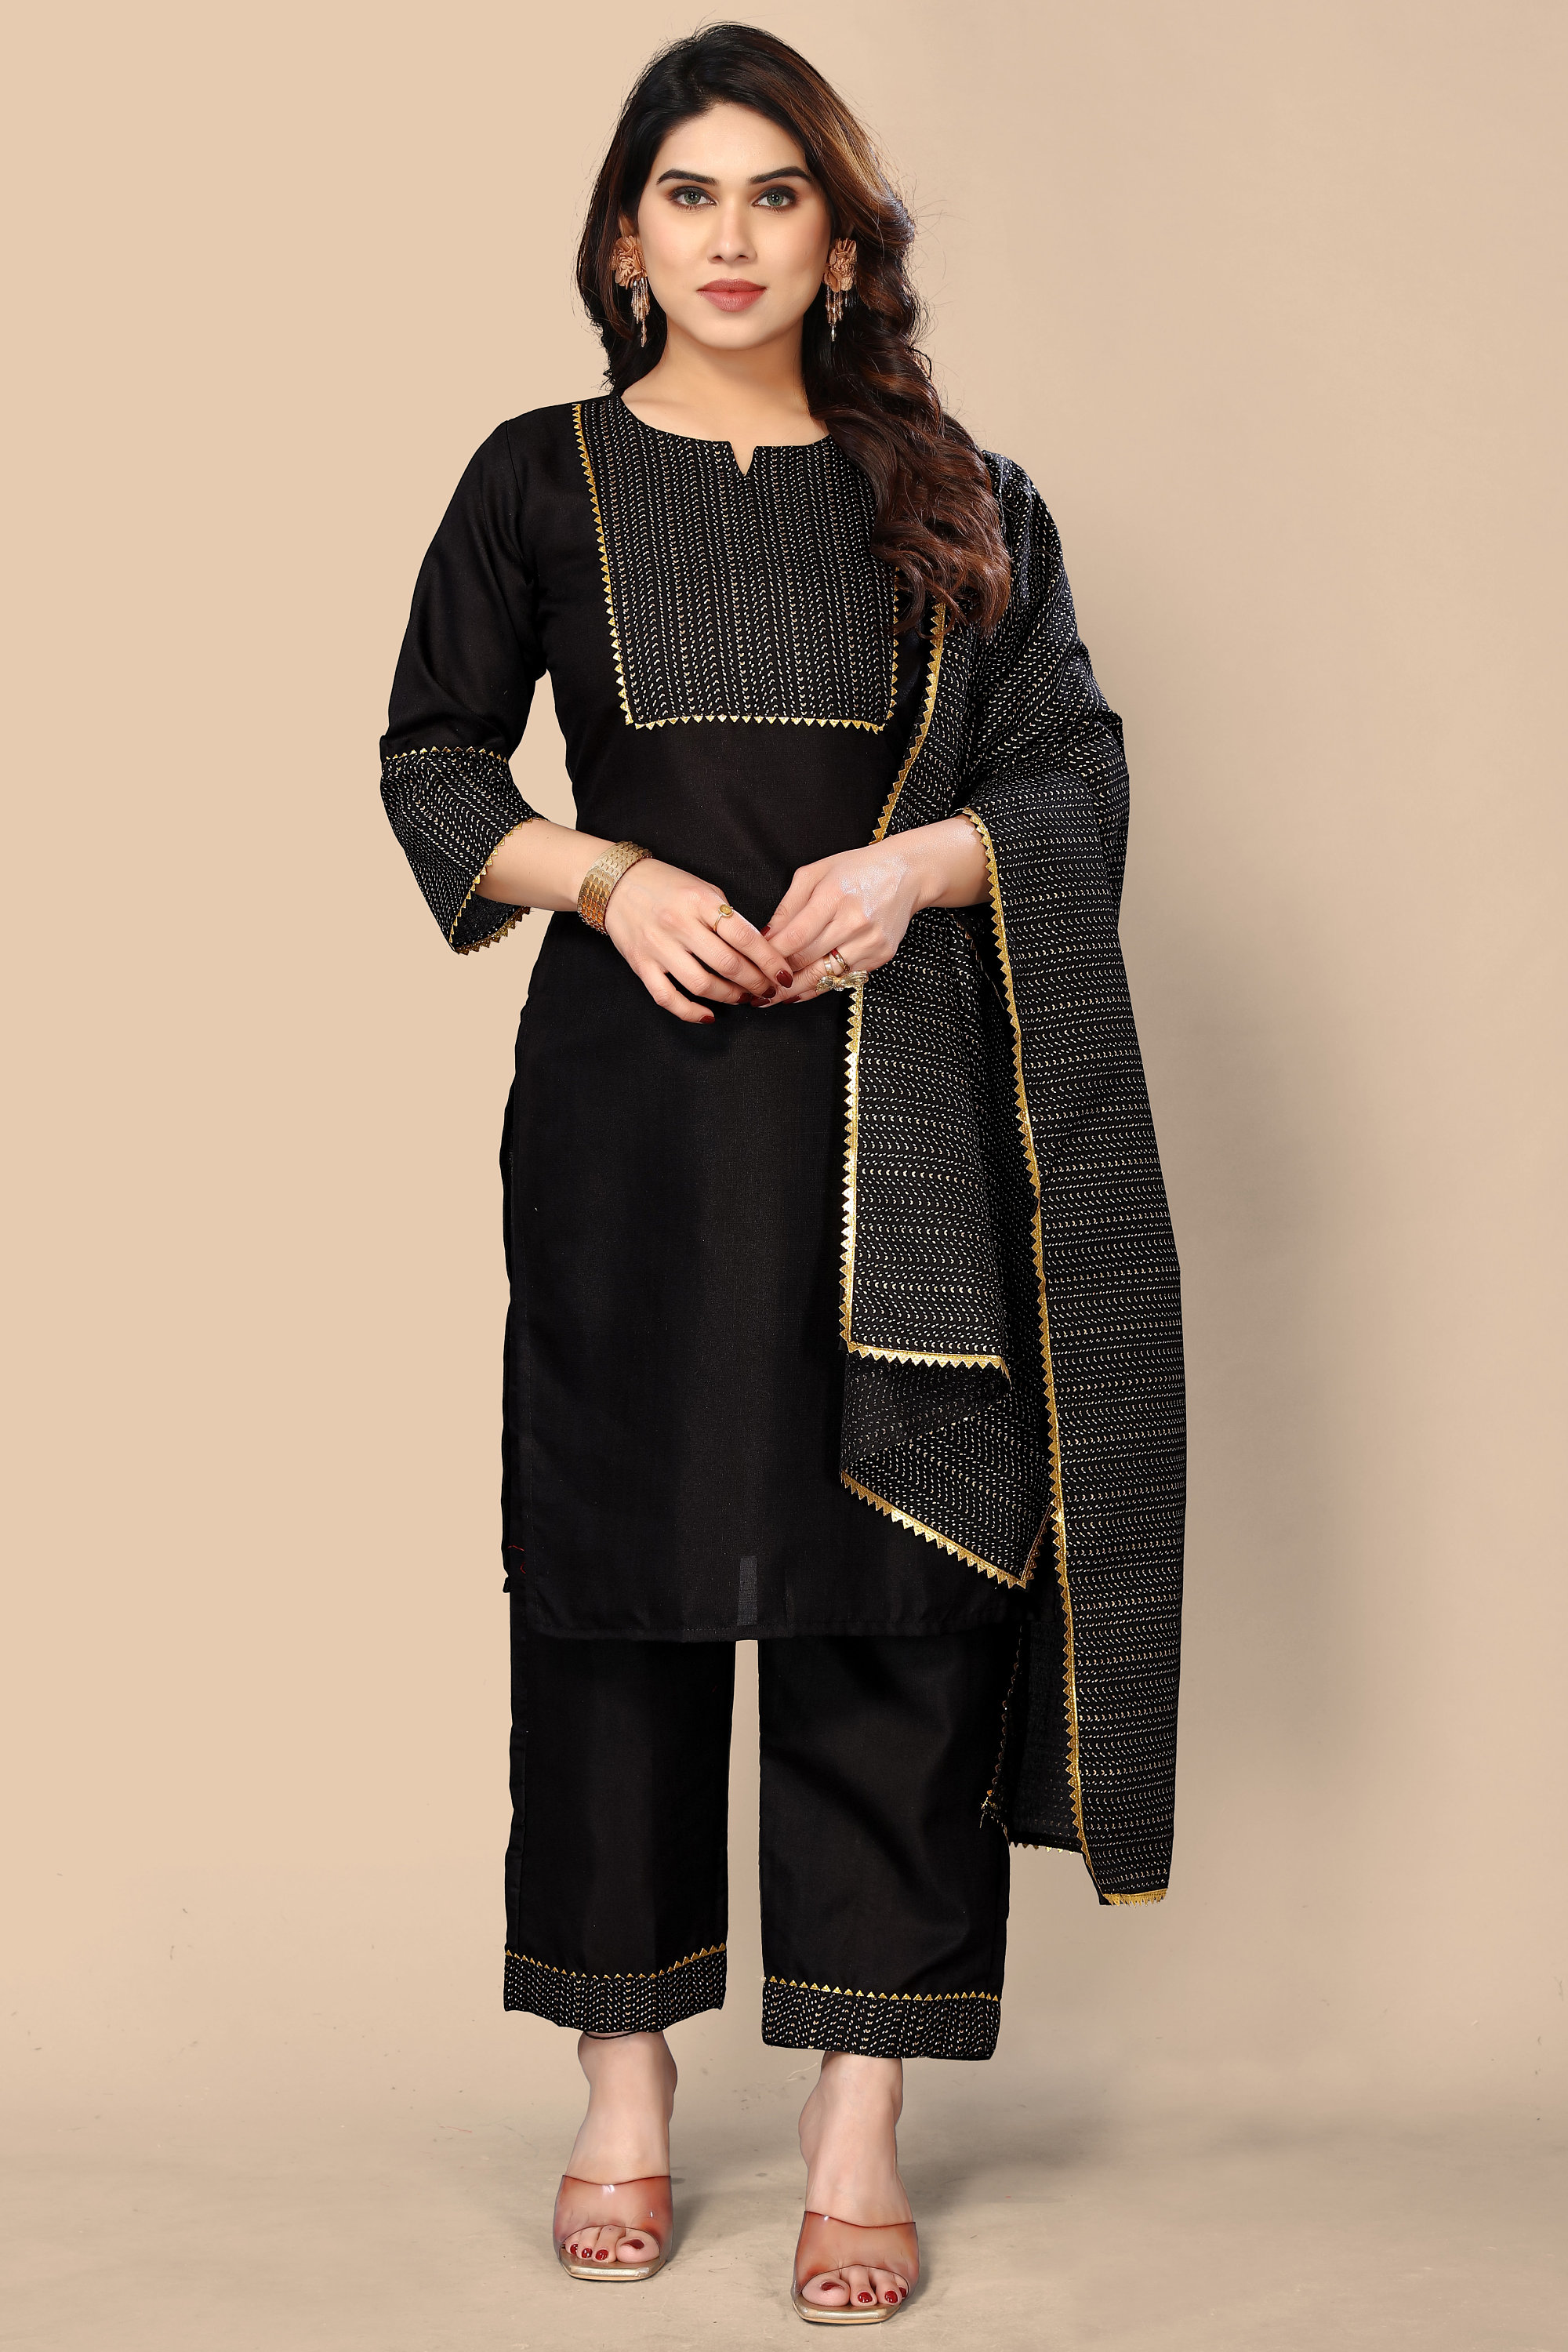 Buy Black Suit For Women At Best Prices Online In India